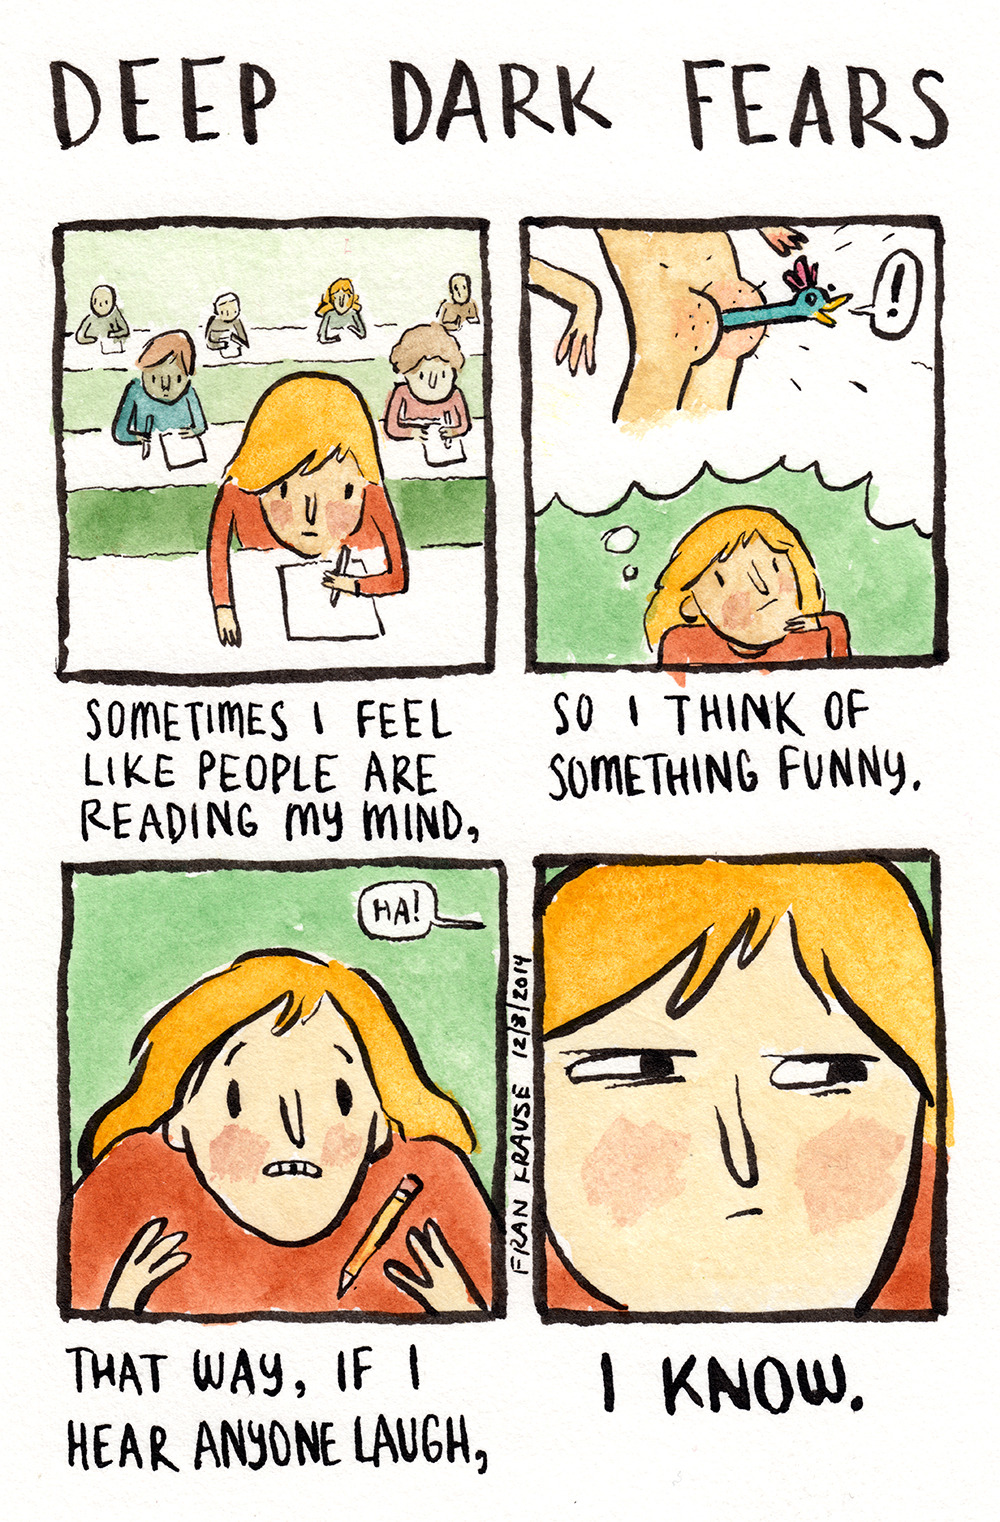 An anonymous fear submitted to deep dark fears